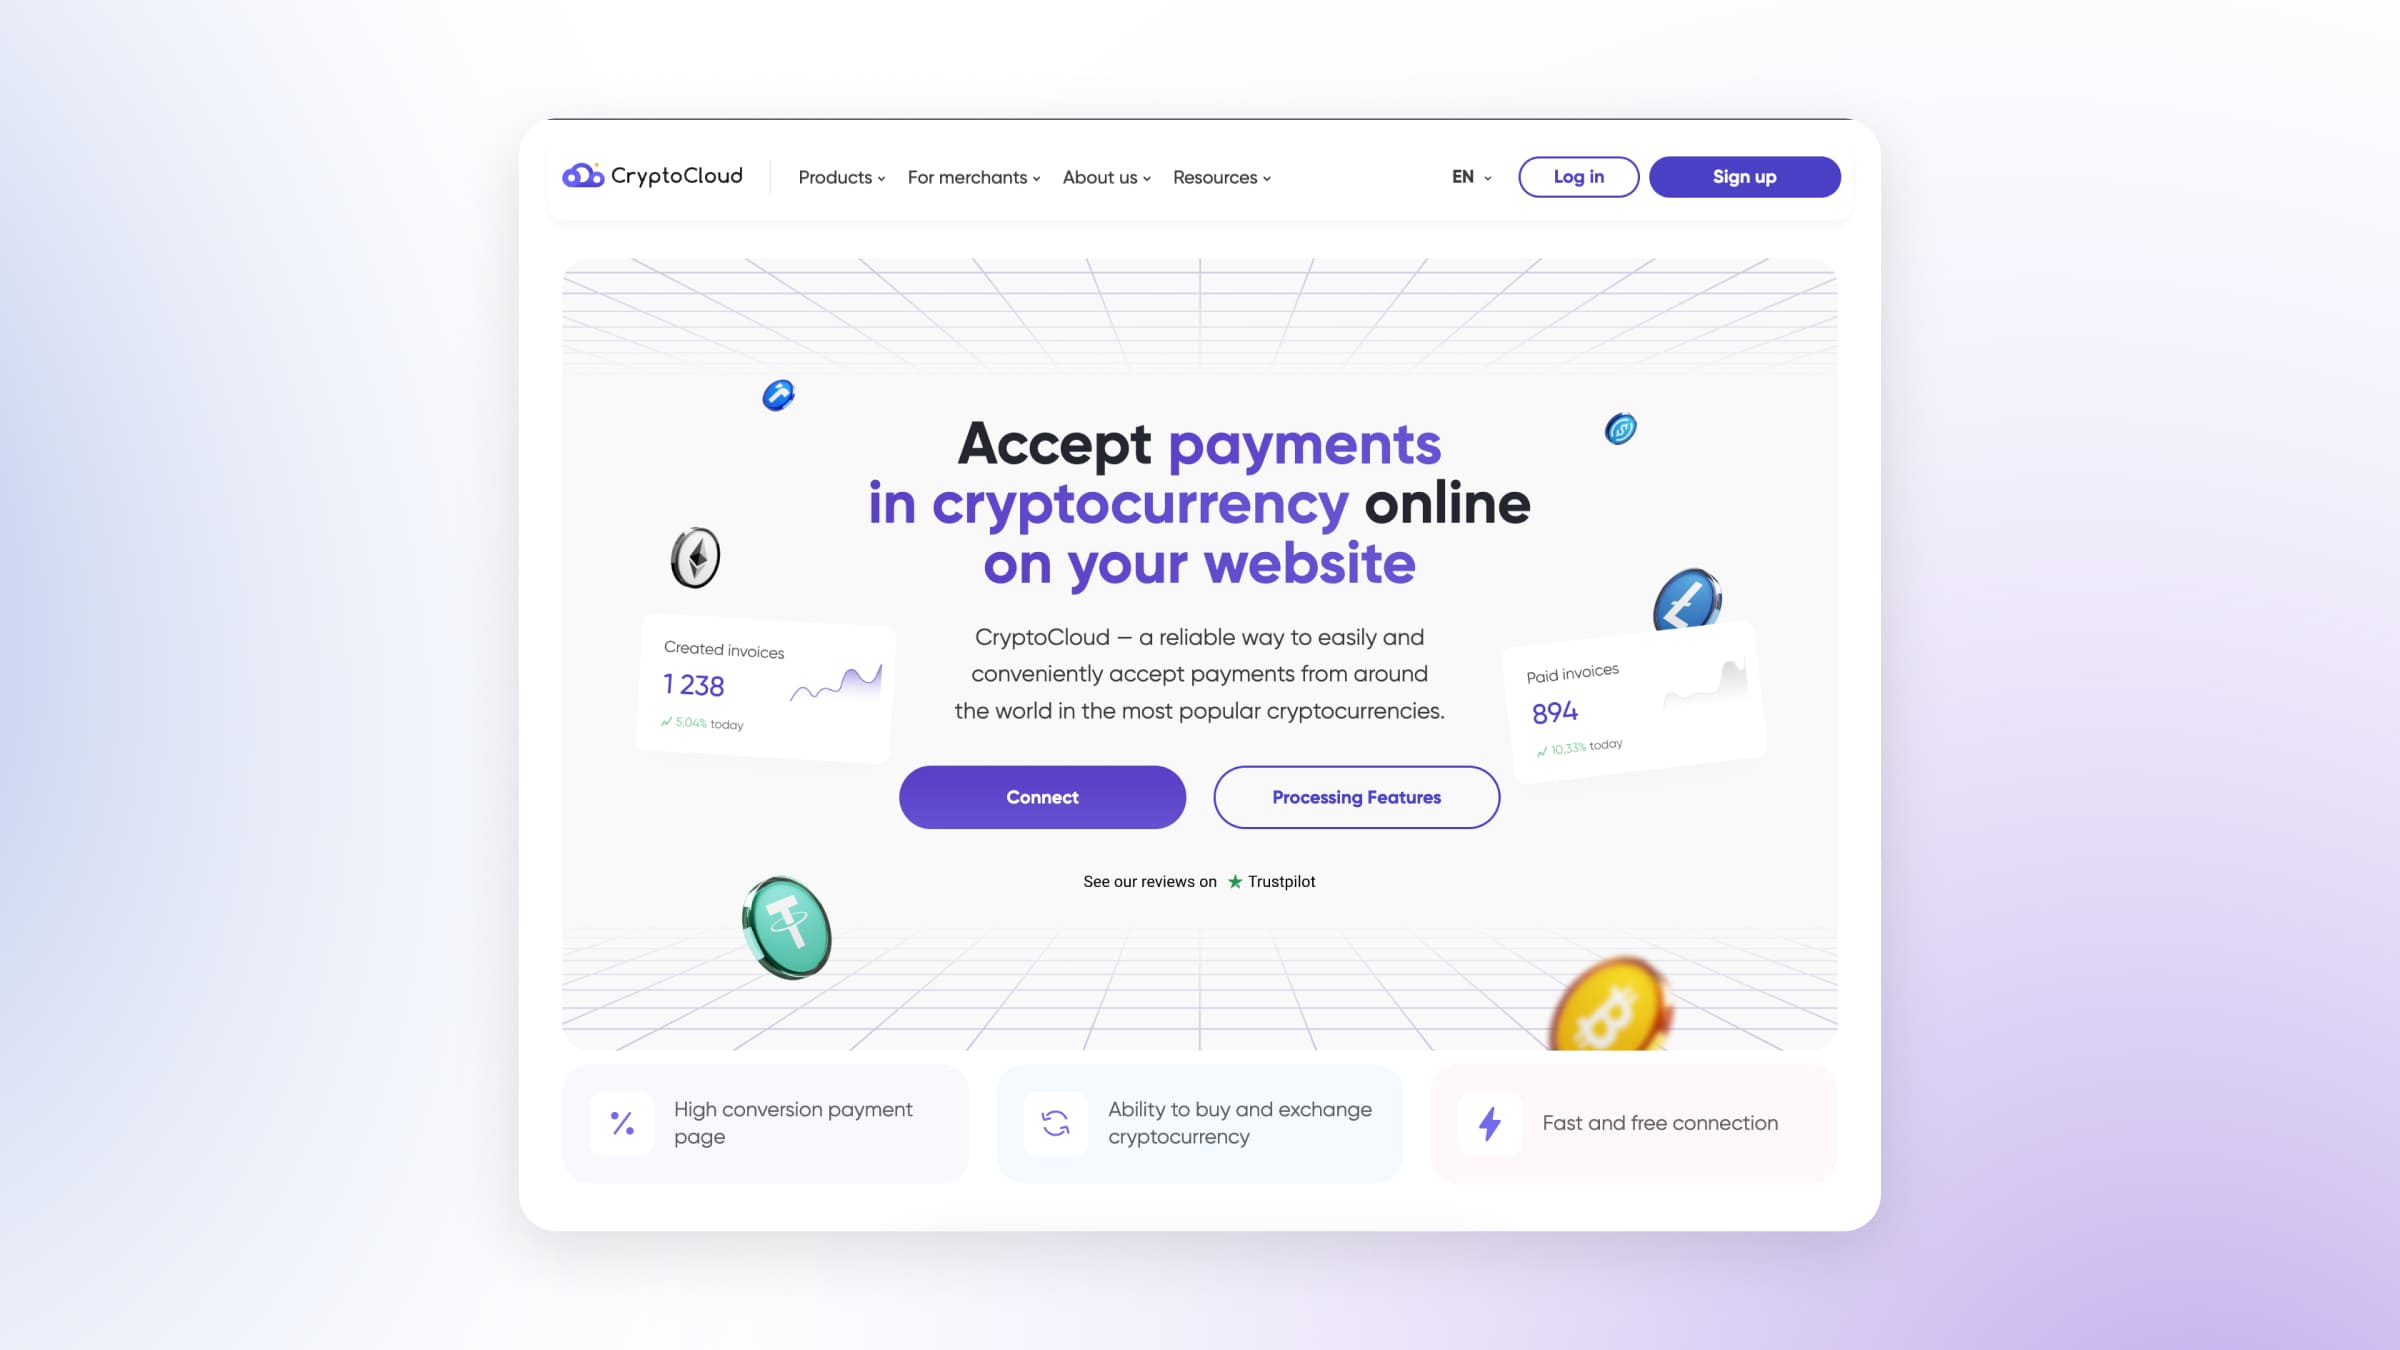 Connecting CryptoCloud to accept cryptocurrency on the website.